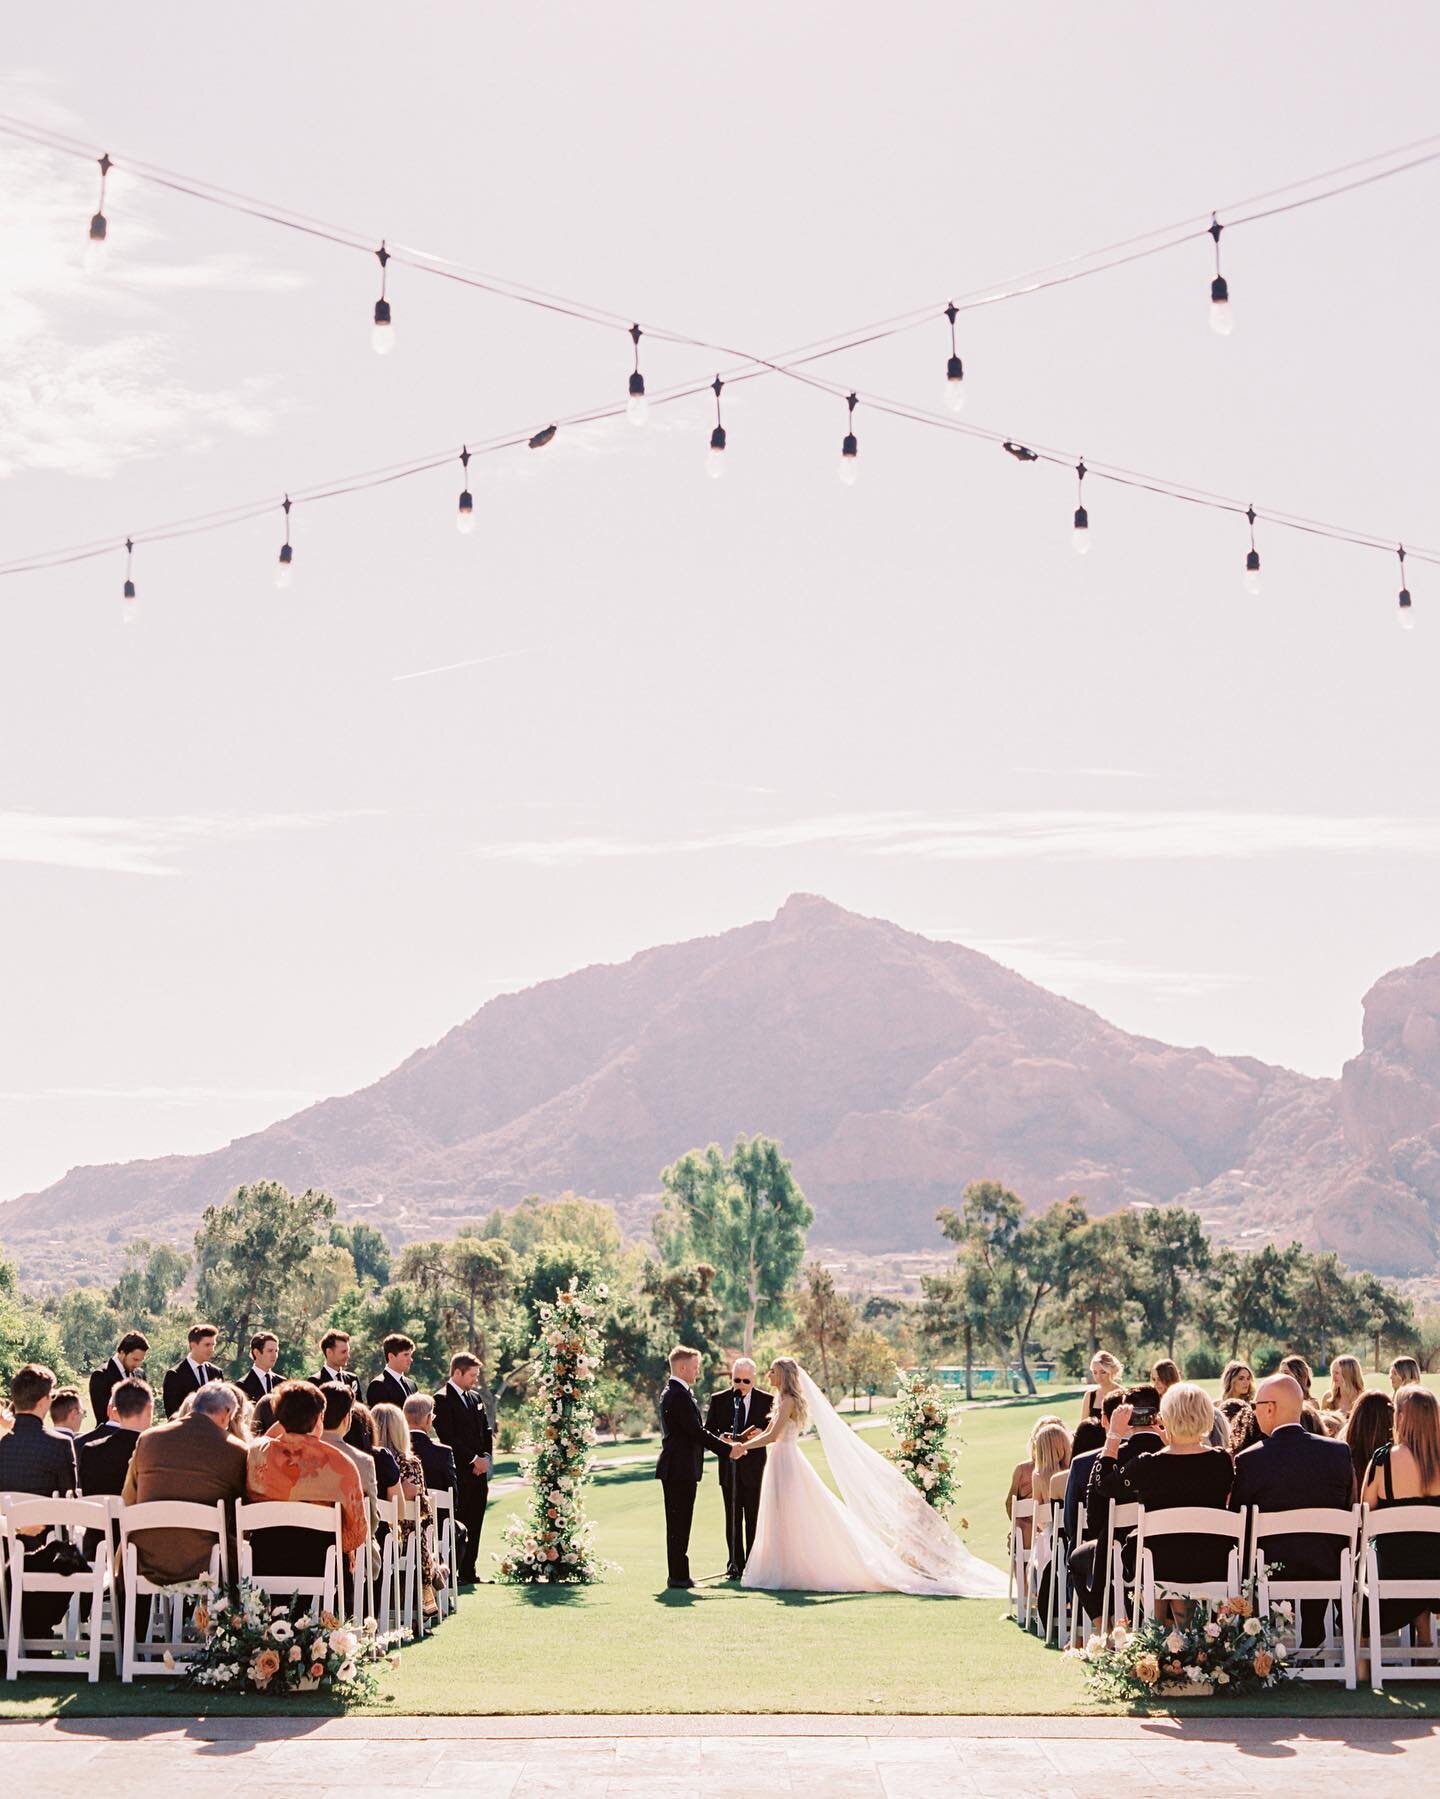 When you have the best ceremony views😍

Swipe for more details🌸

Click the link in our bio to inquire today! 

📸: @maryclaire_photography